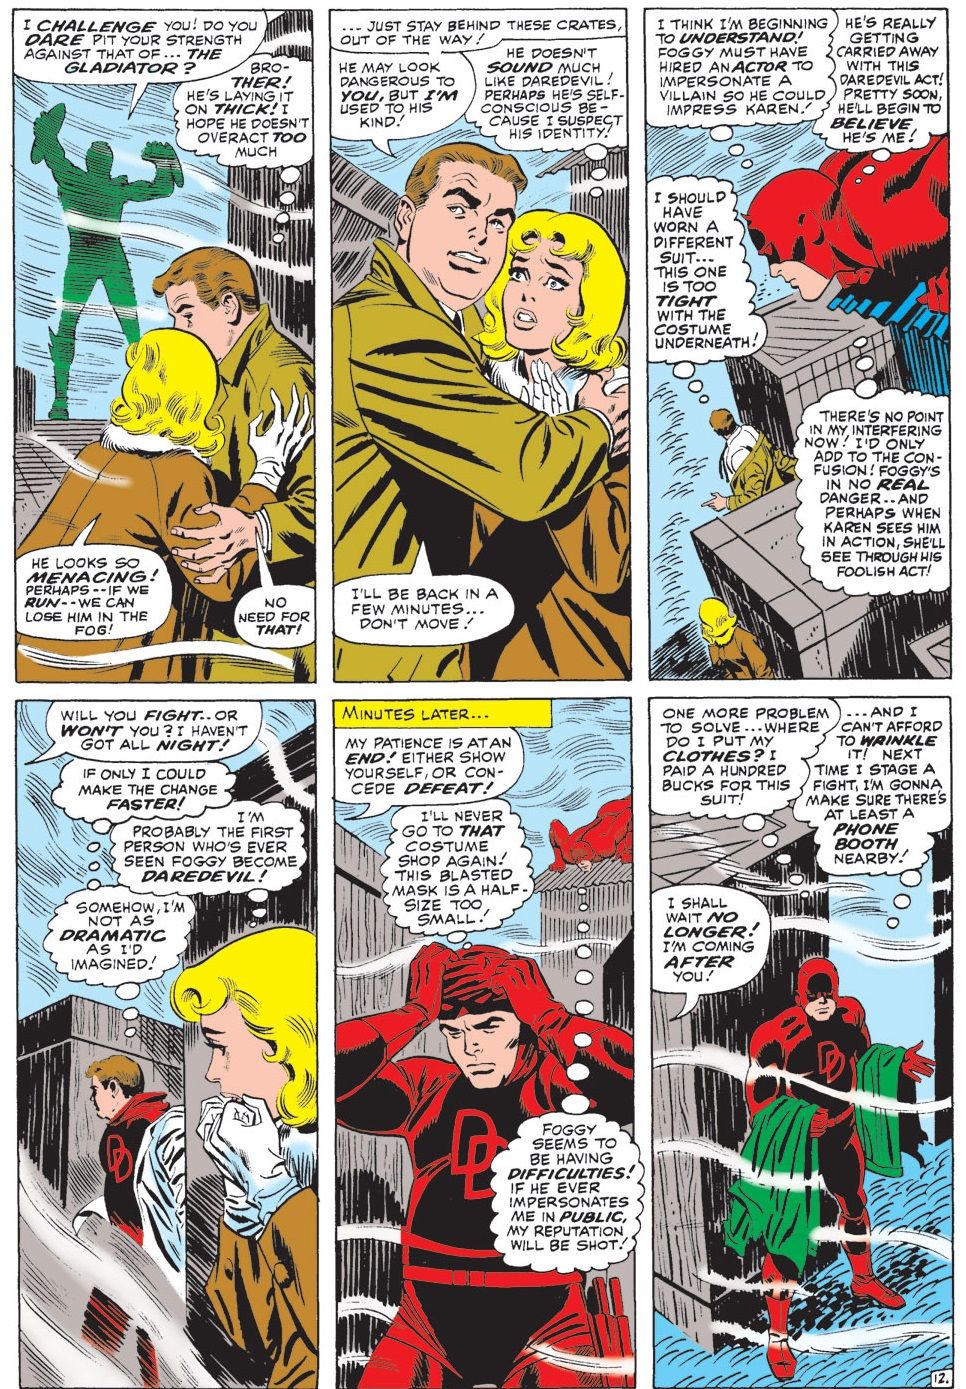 Daredevil: Maybe Telling Karen Page Your Secret Identity is a Bad Idea